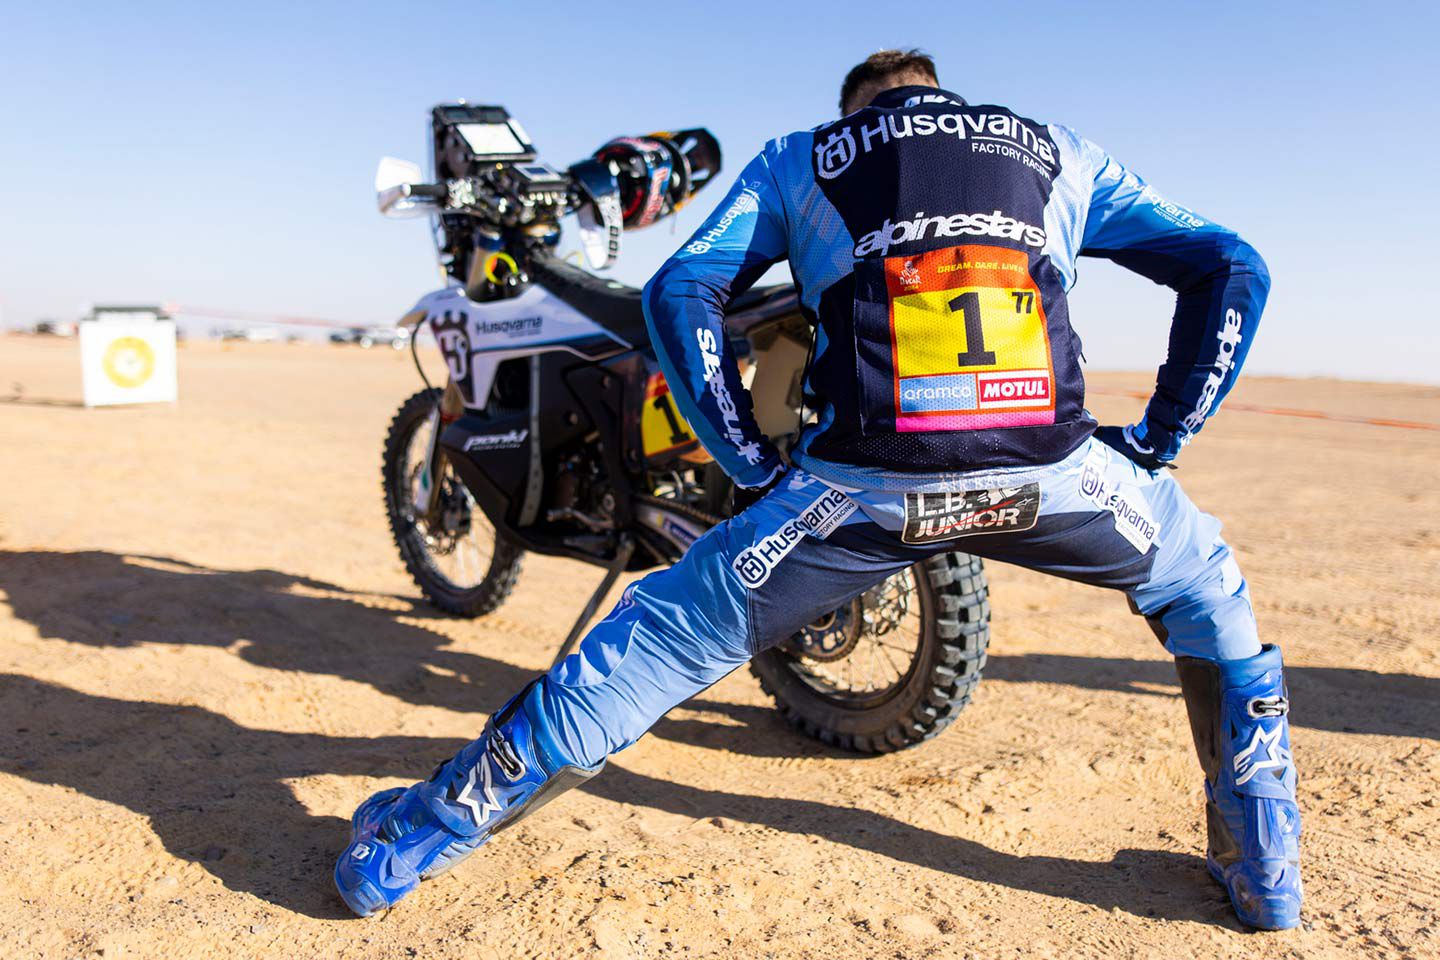 Luciano Benavides stretches before manning his Husqvarna Factory Racing Husqvarna during Stage 4. He would finish fourth overall.